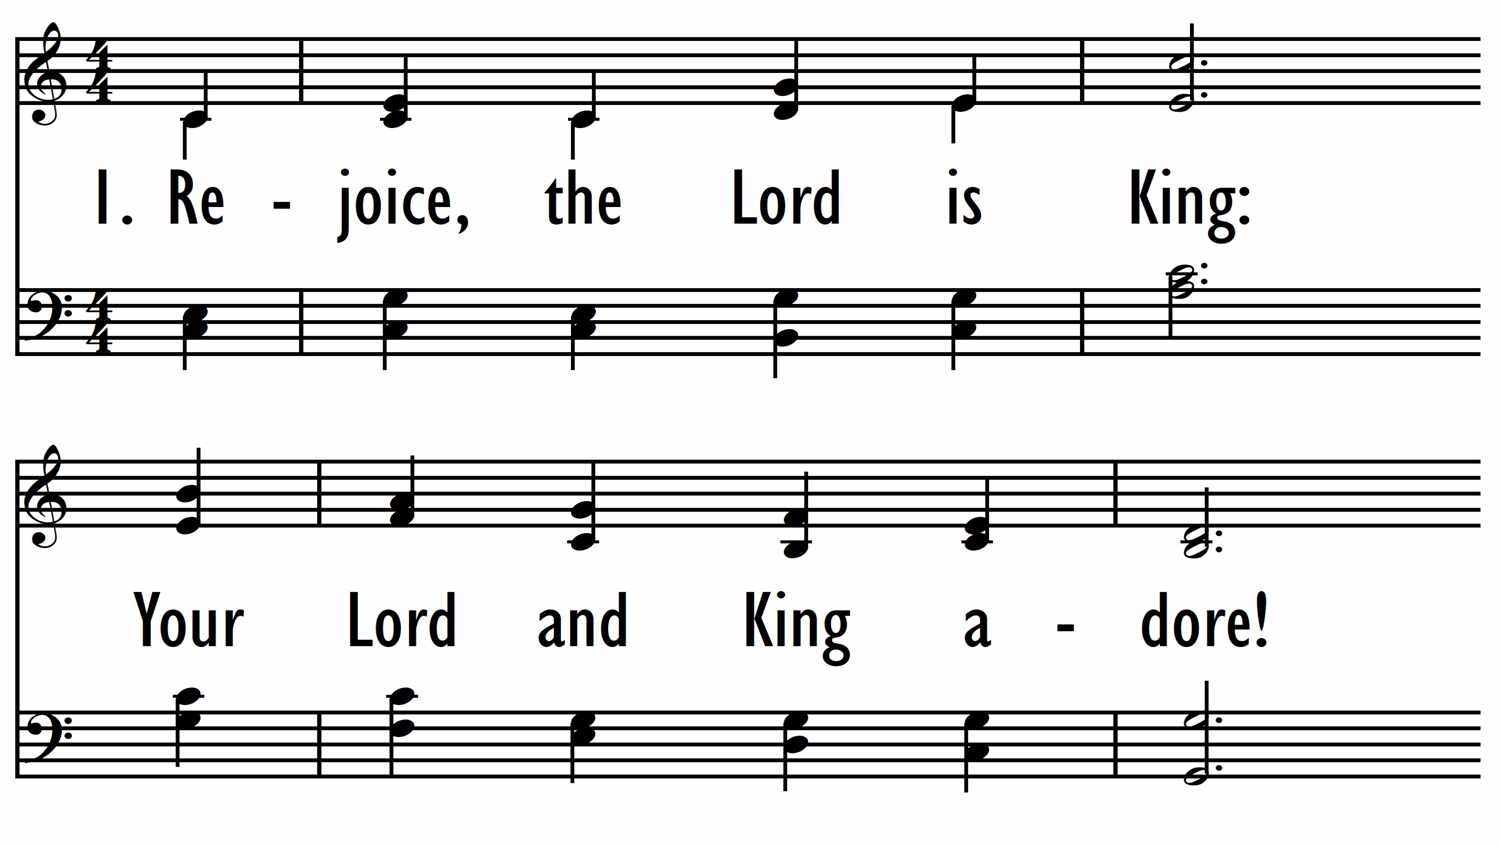 REJOICE, THE LORD IS KING - with opt. last st. setting and choral ending.-ppt